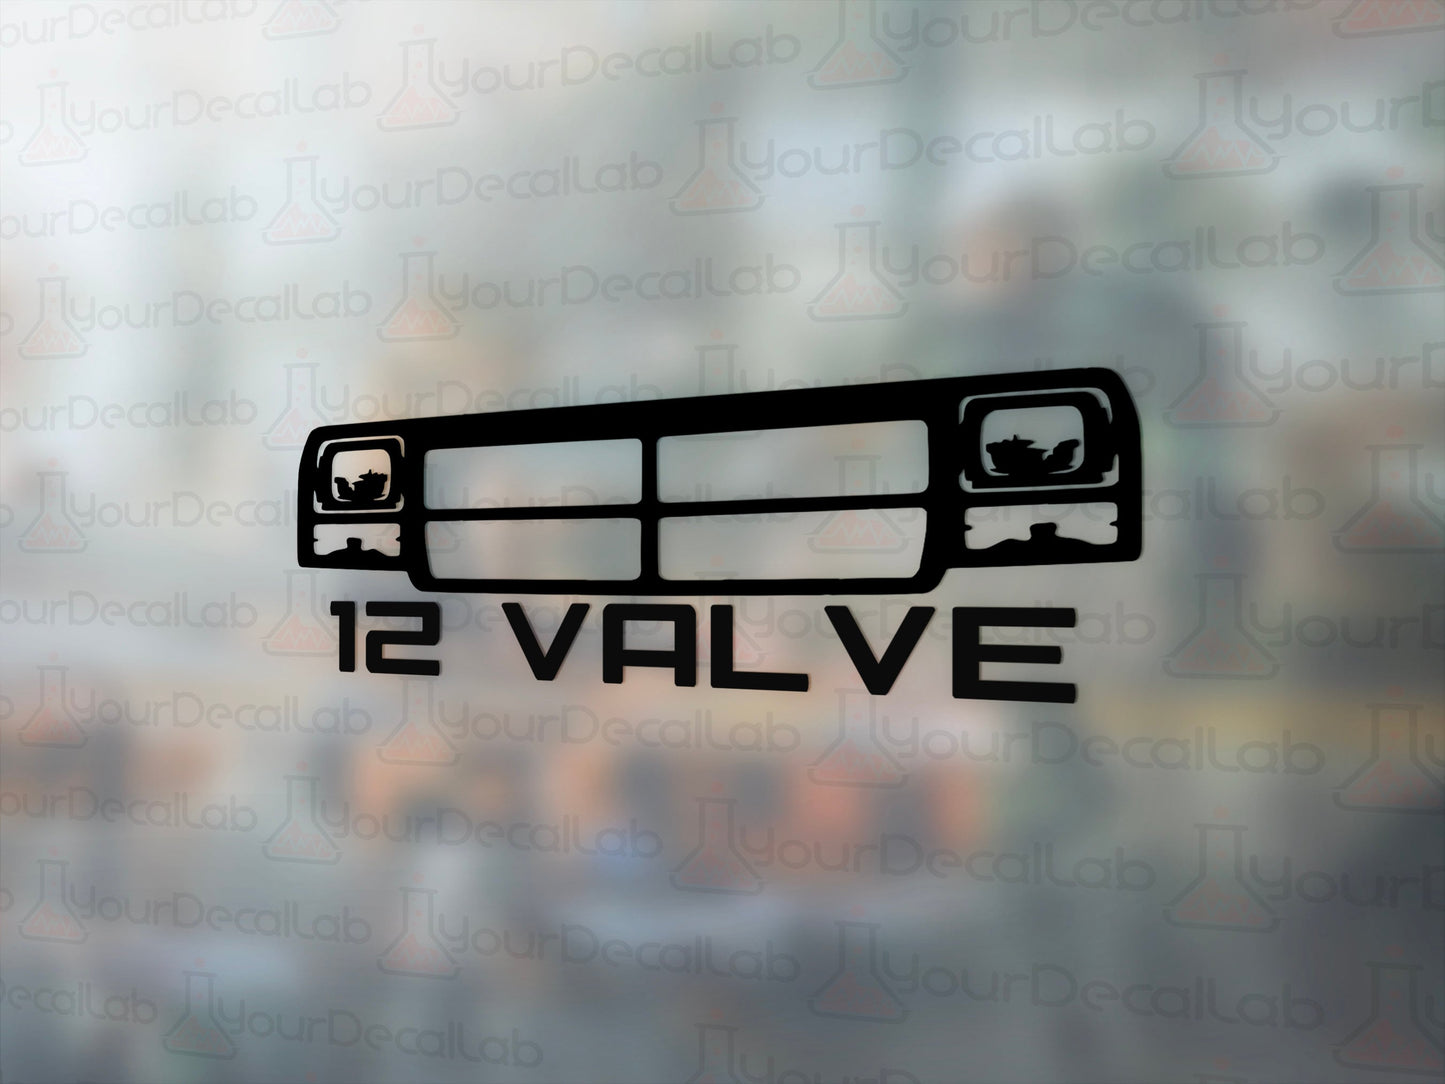 12 Valve 1st Gen Grille Decal - Many Colors & Sizes